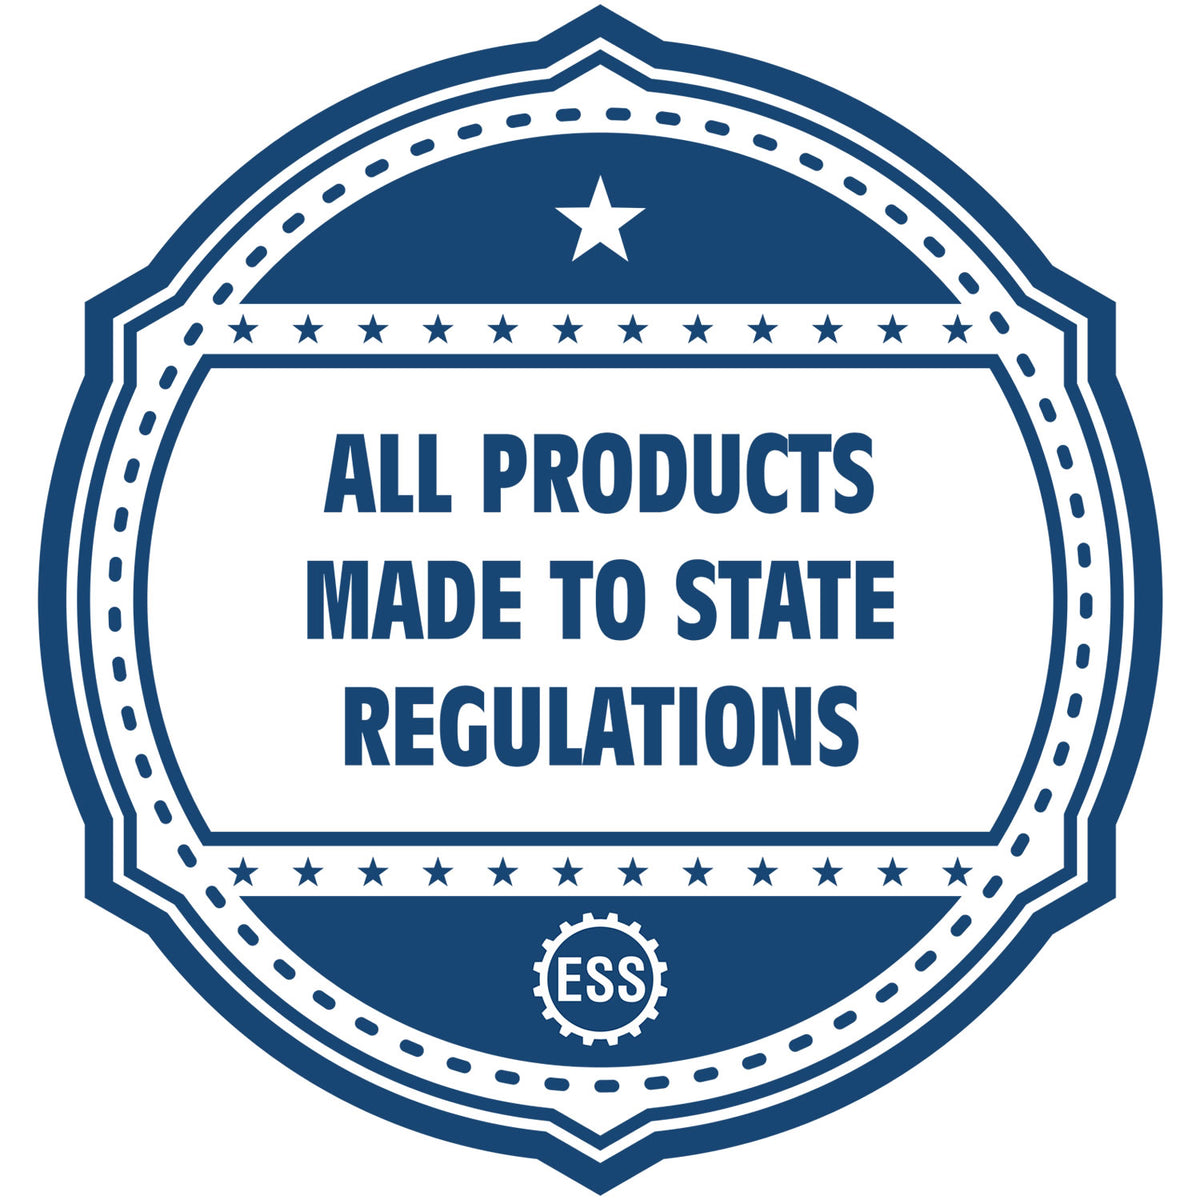 An icon or badge element for the State of Ohio Soft Land Surveyor Embossing Seal showing that this product is made in compliance with state regulations.